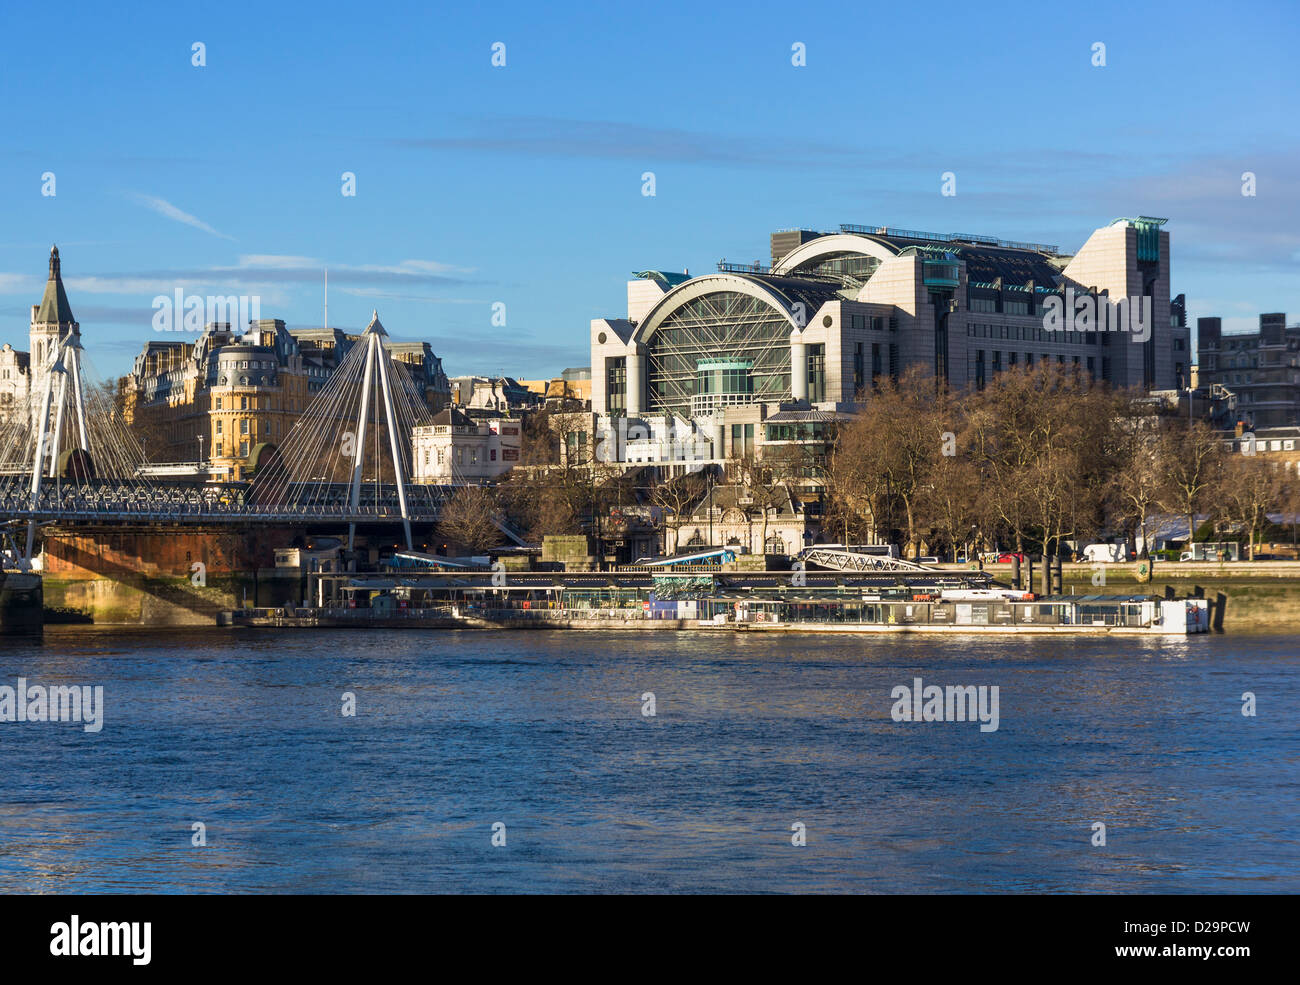 London view of Charing Cross station and Hungerford Bridge across the Thames River, London, England, UK Stock Photo